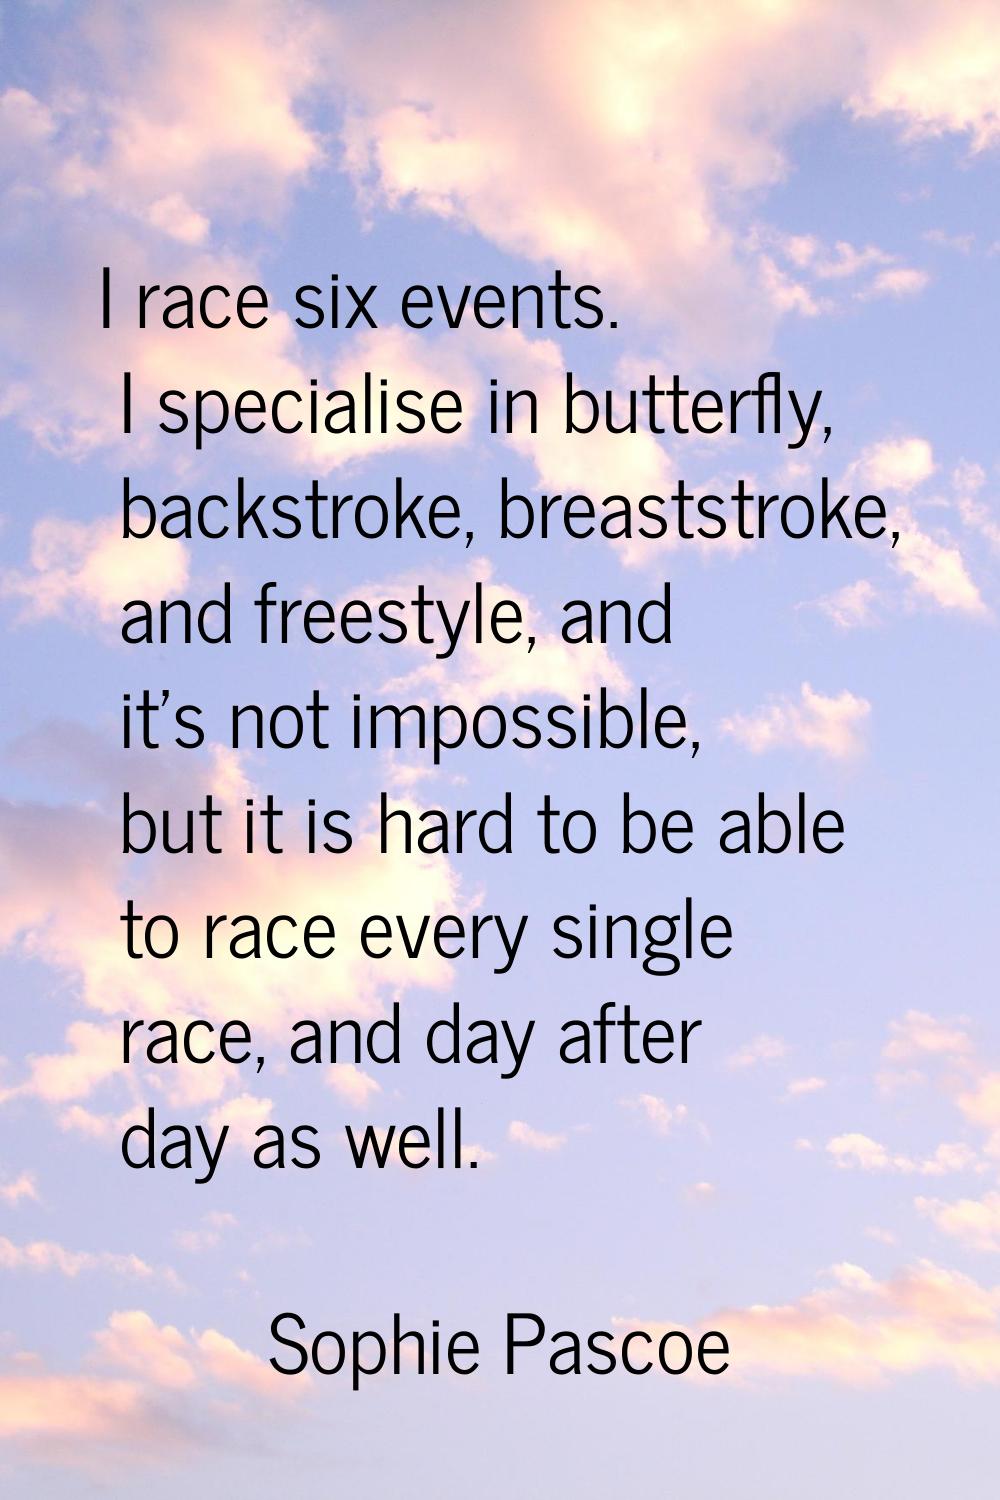 I race six events. I specialise in butterfly, backstroke, breaststroke, and freestyle, and it's not